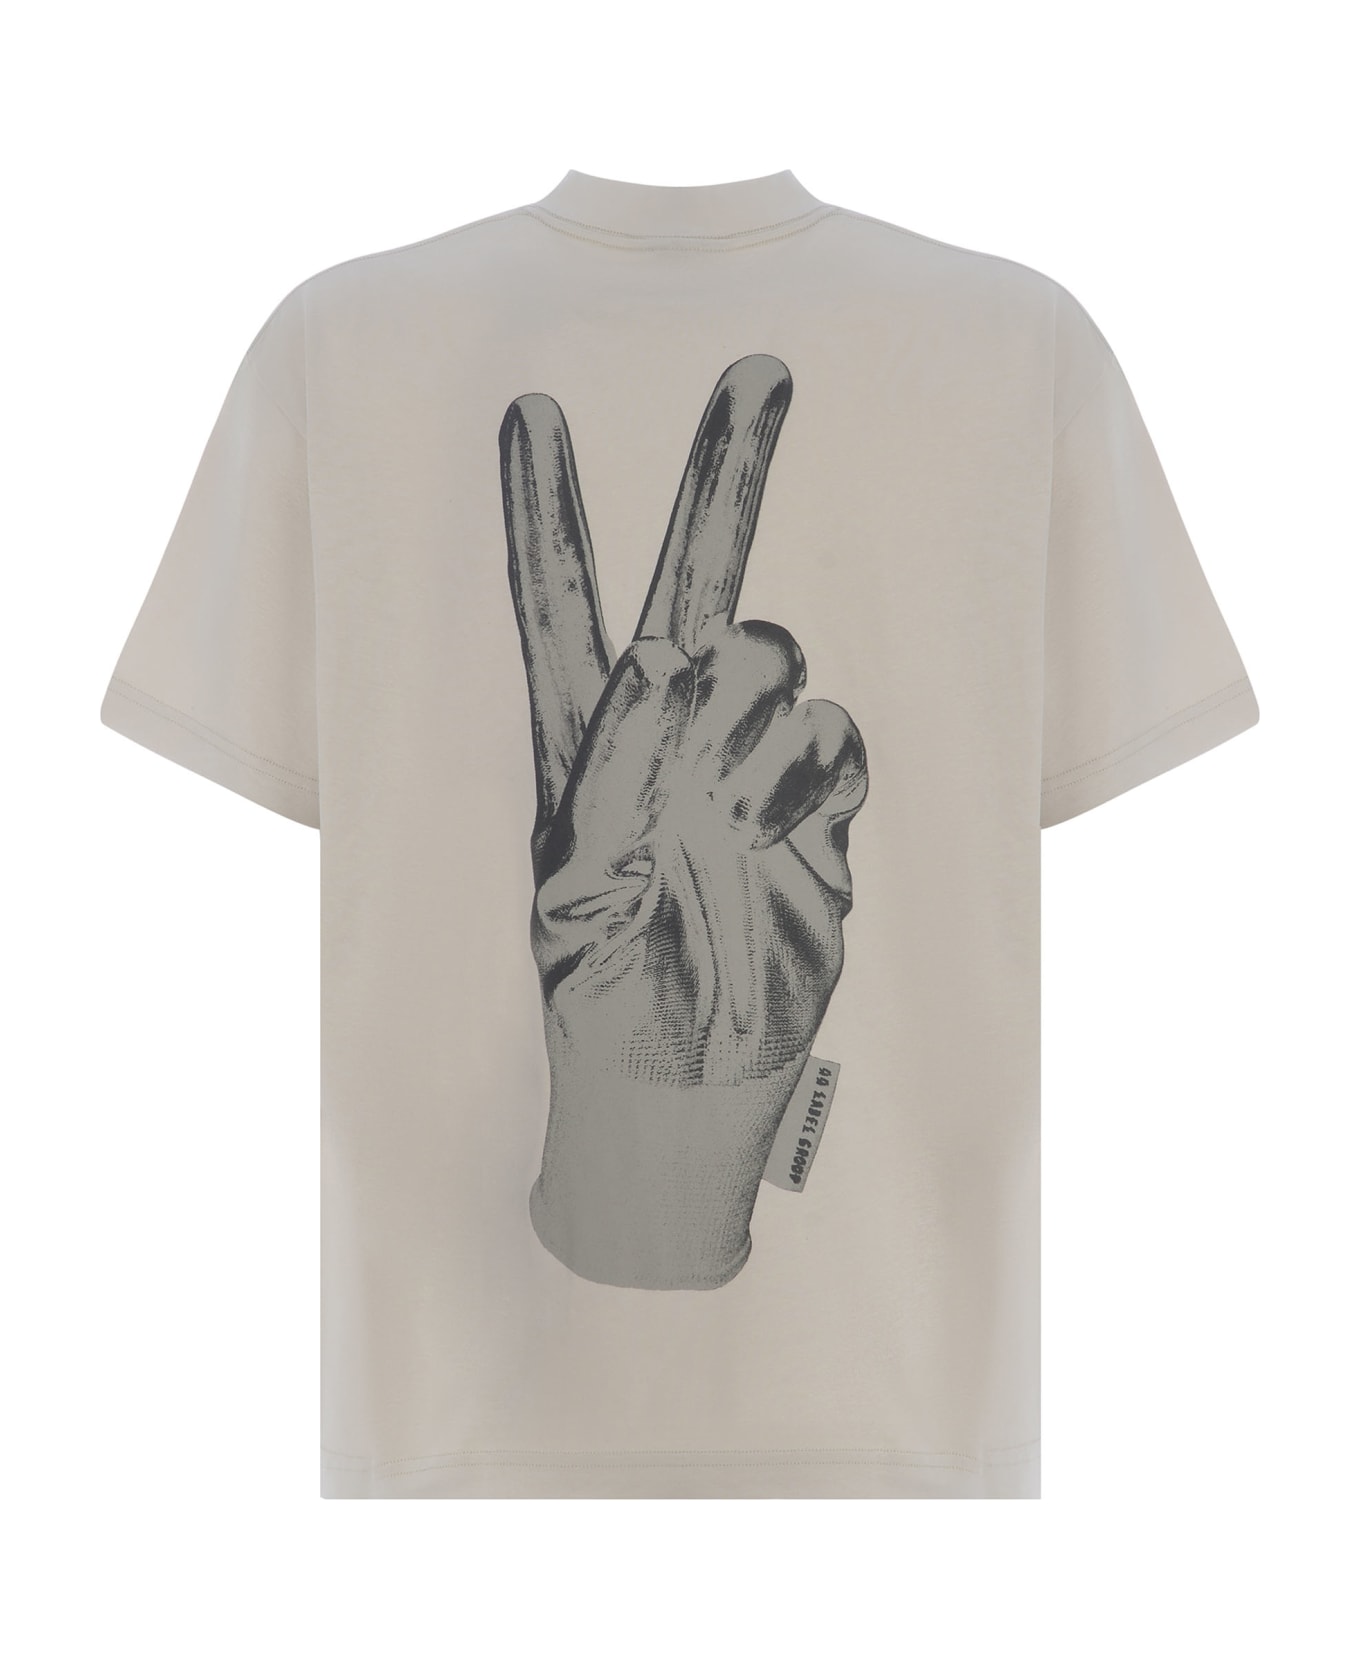 44 Label Group T-shirt 44 Label Group "peace" Made Of Cotton - Crema シャツ